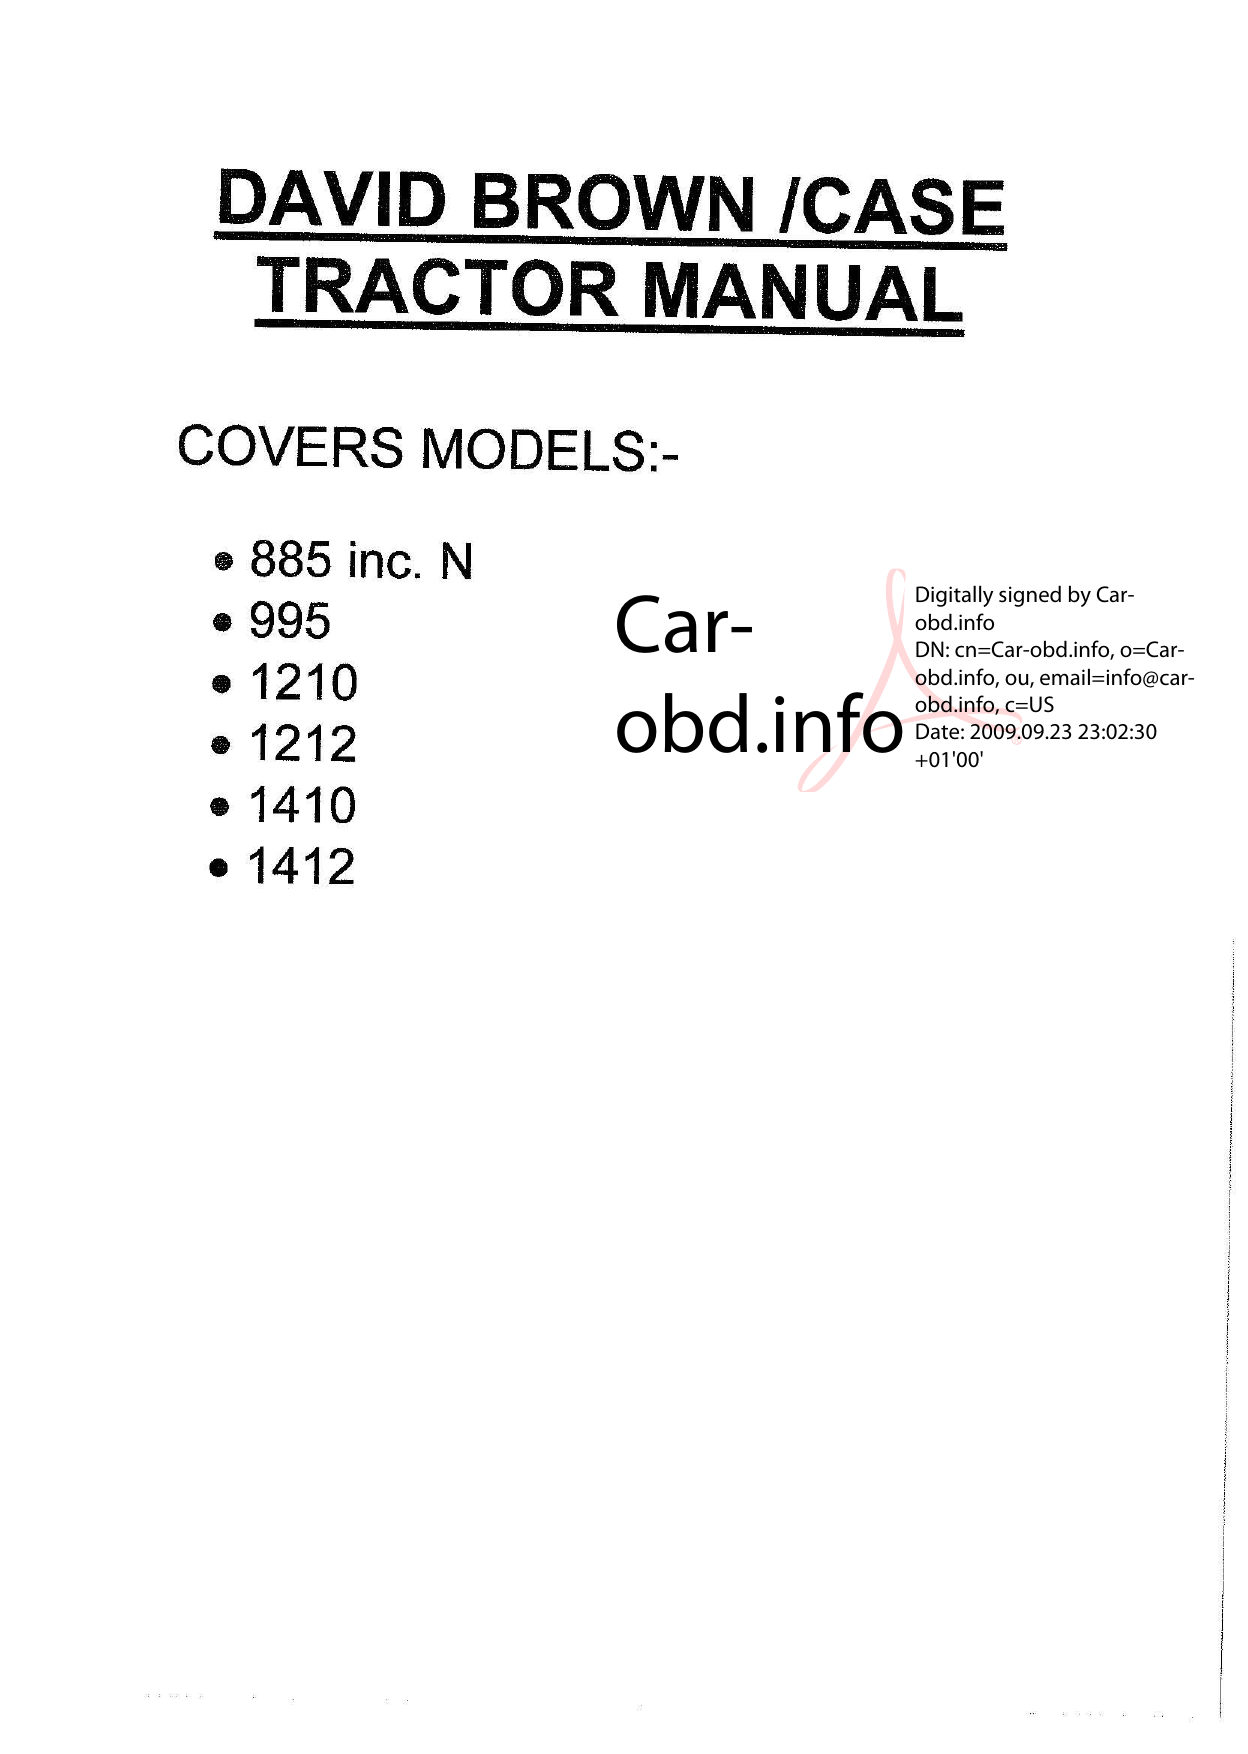 1971-1980 David Brown/Case™ 885, 995, 1210, 1410, 1412 tractor manual Preview image 1